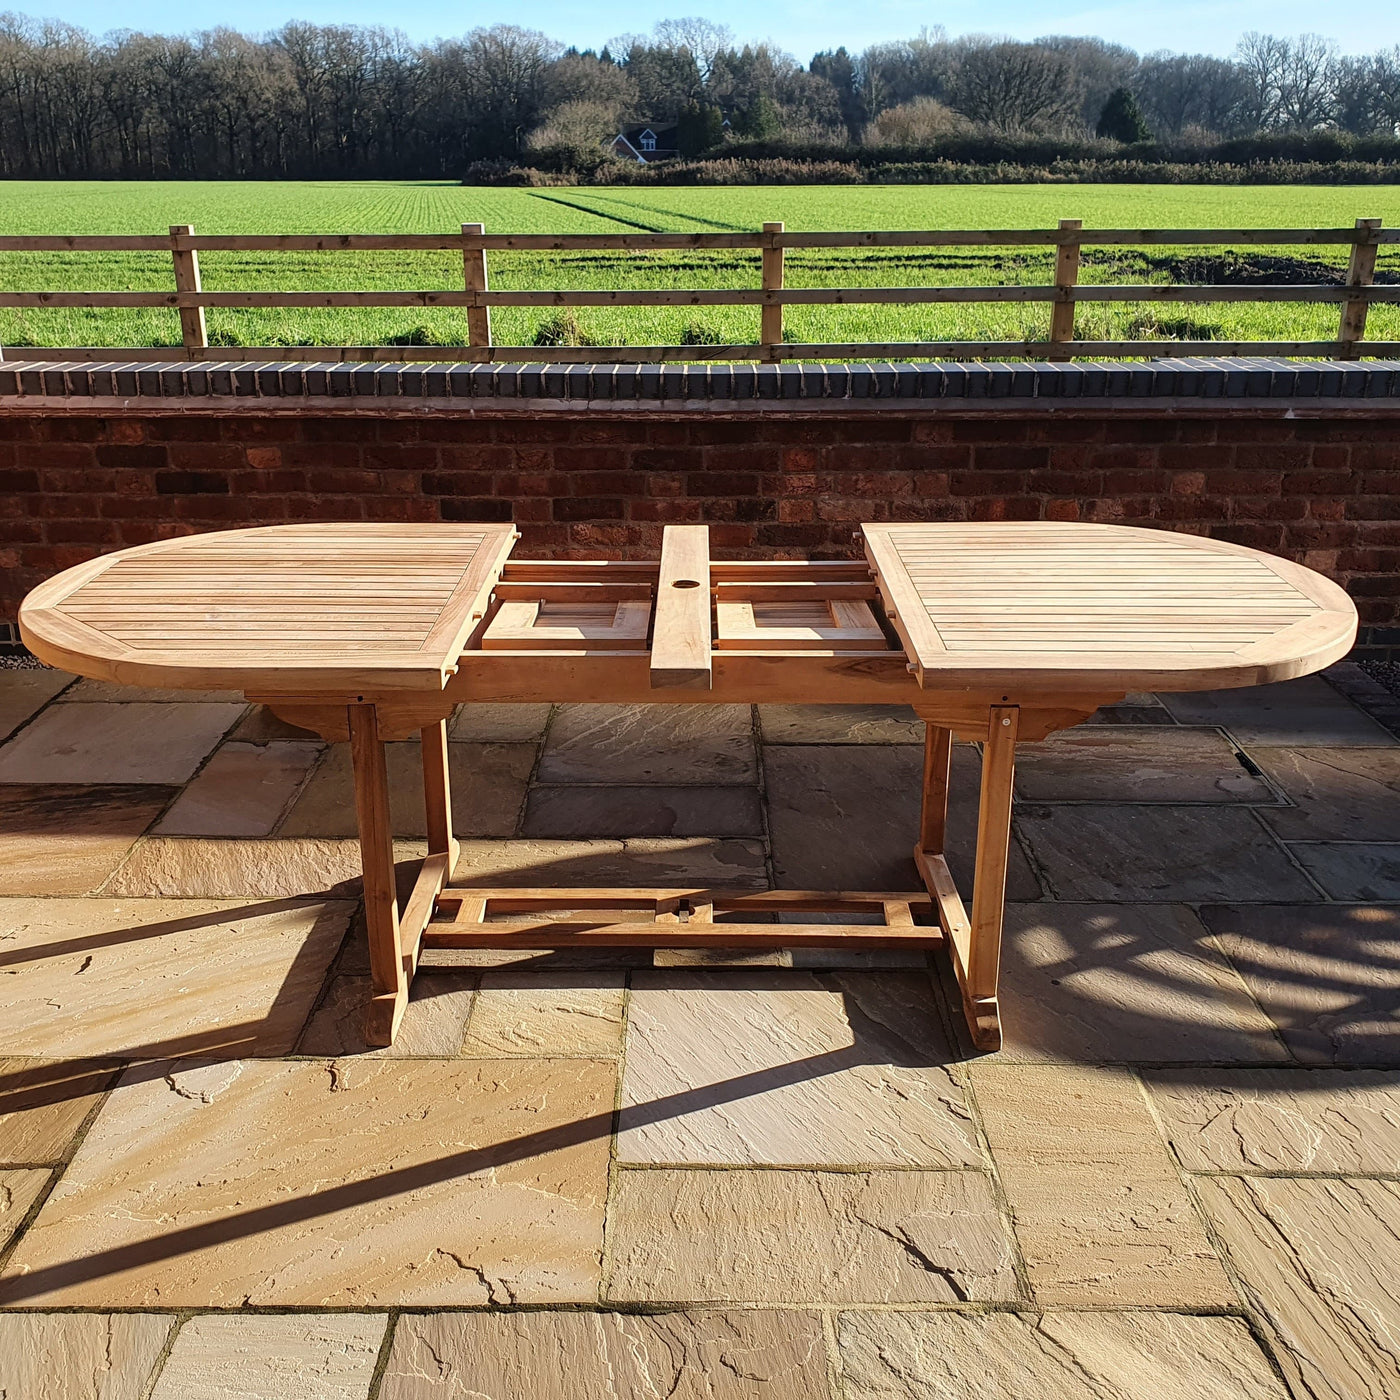 Premium Teak Oval 180-240cm Garden Furniture Set (with 8 Oxford Stacking Chairs) Cushions Included oval table with a folding design, set on a stone patio overlooking a lush green field, on a sunny day.